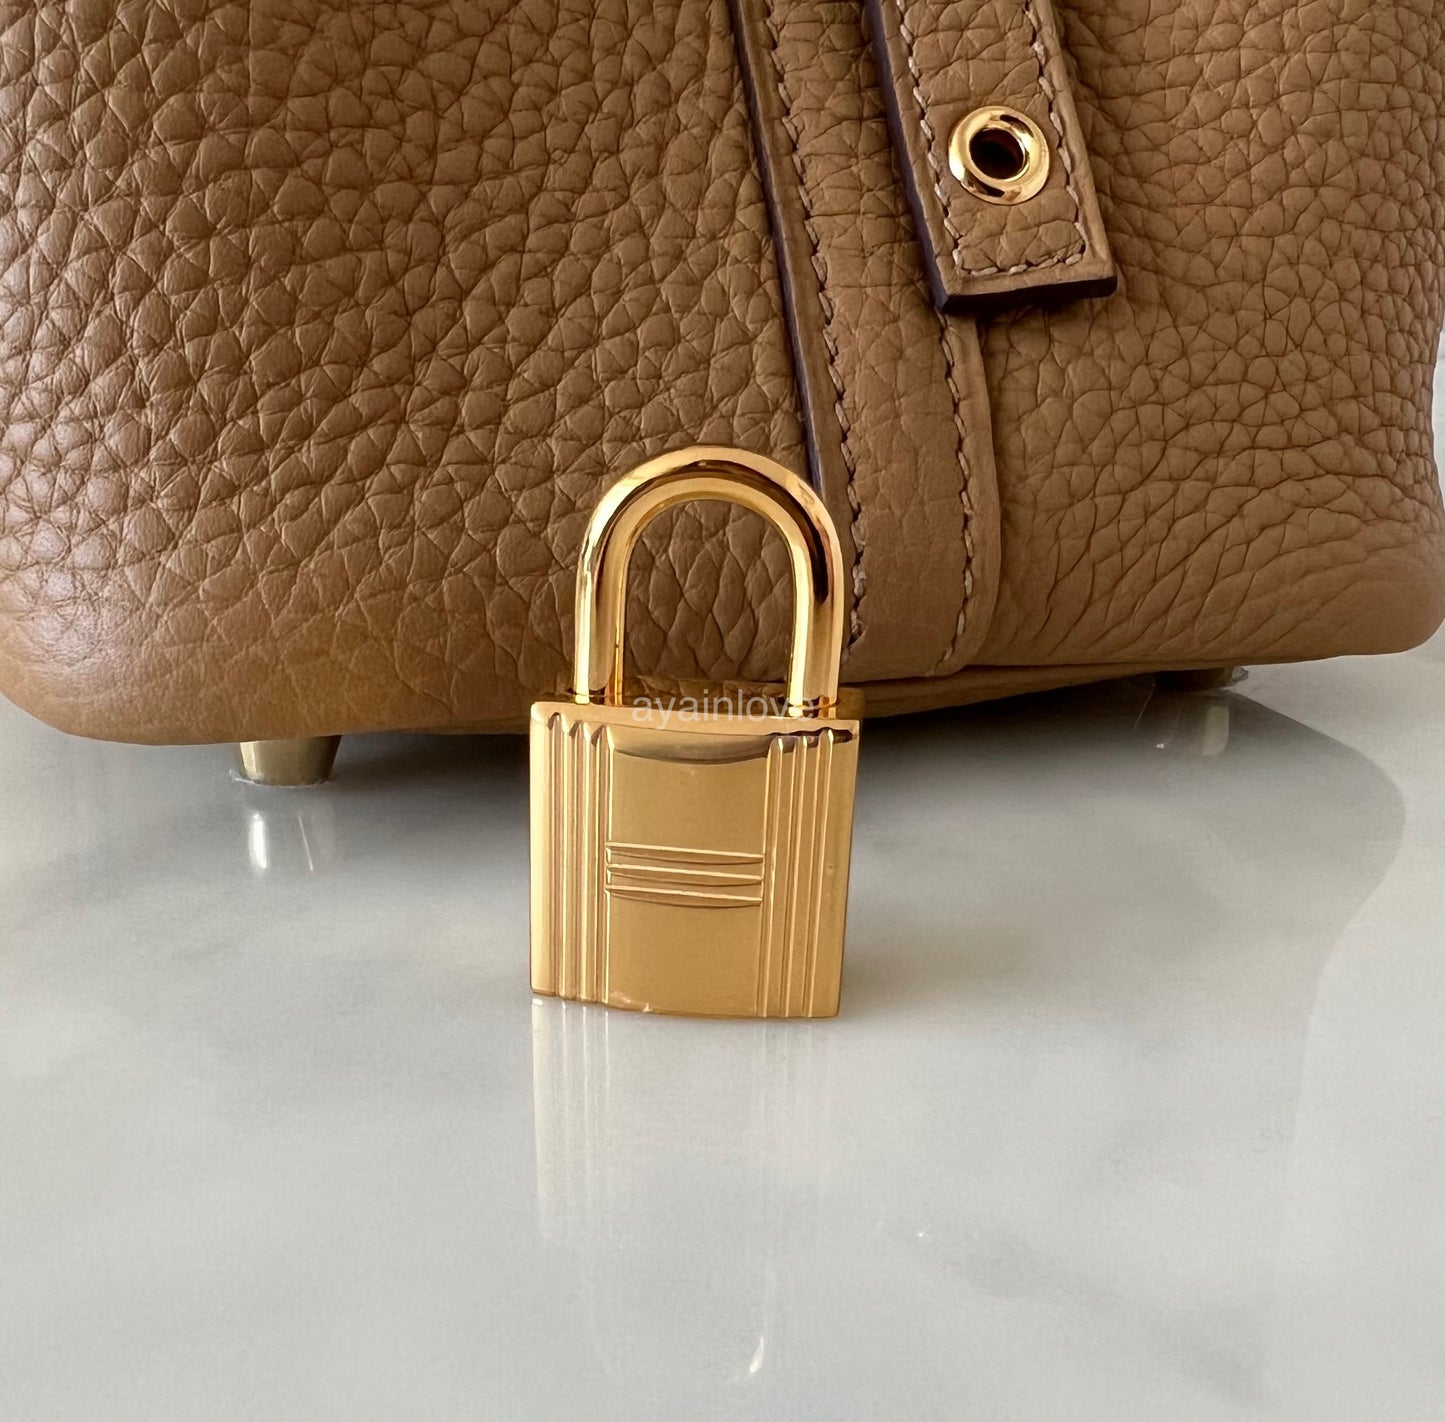 Hermes　Picotin Lock bag PM　Biscuit　Clemence leather　Gold hardware